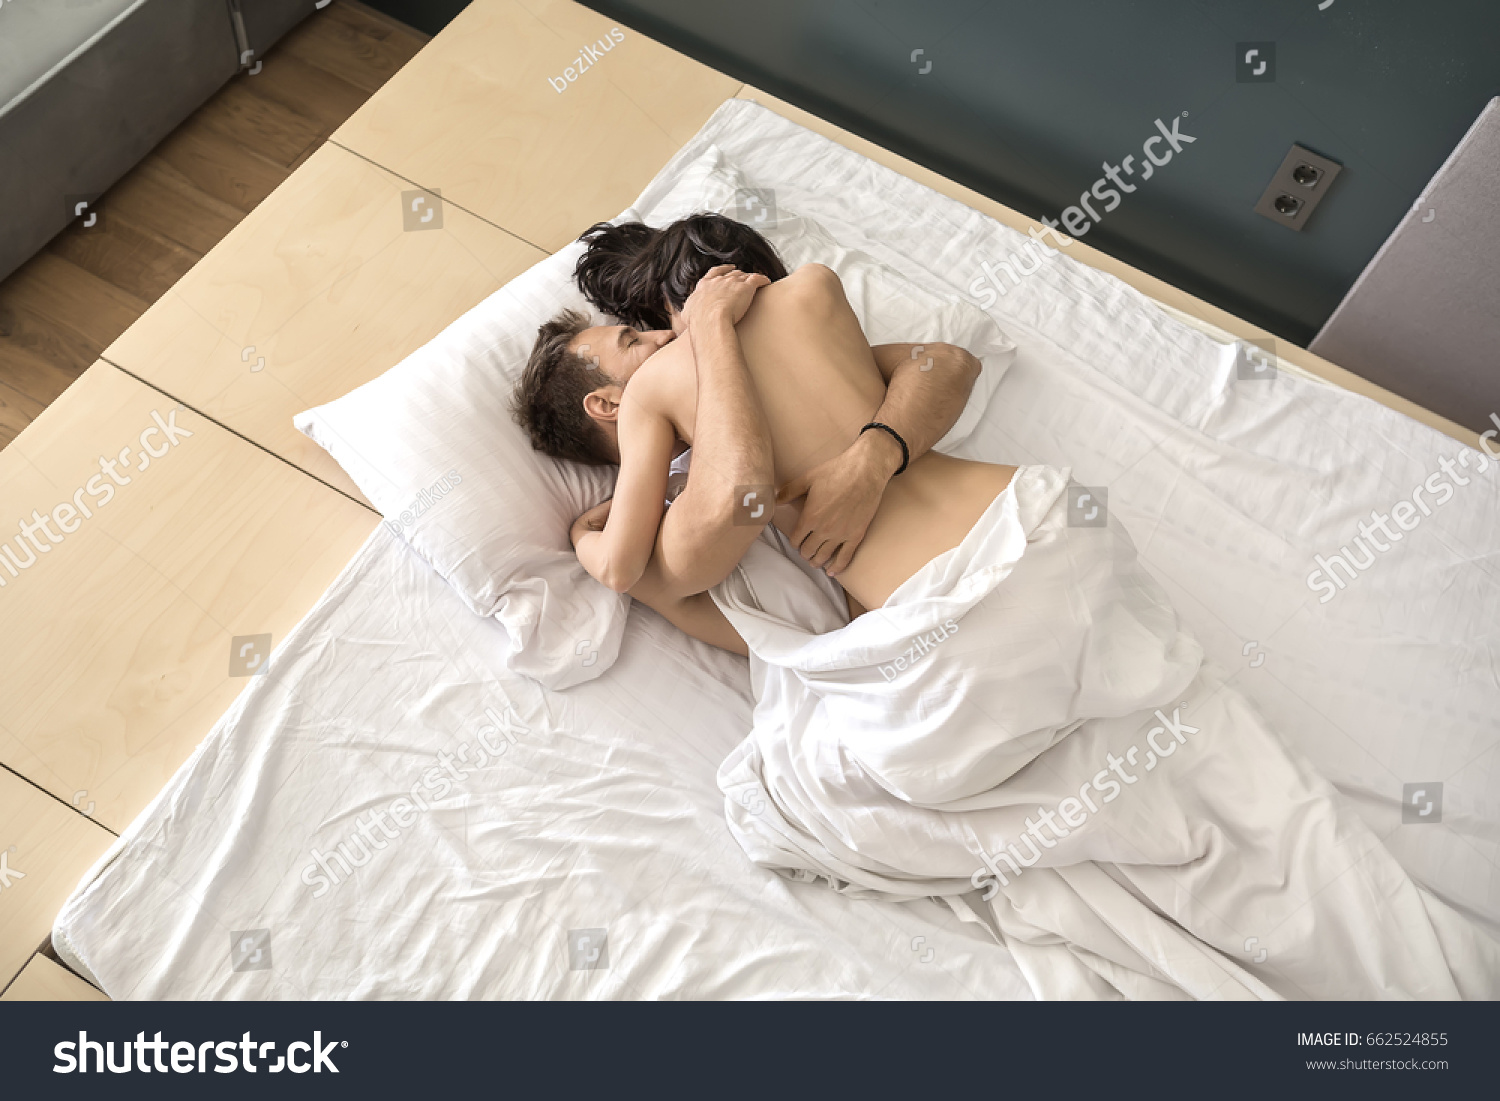 Cute Sex Pictures